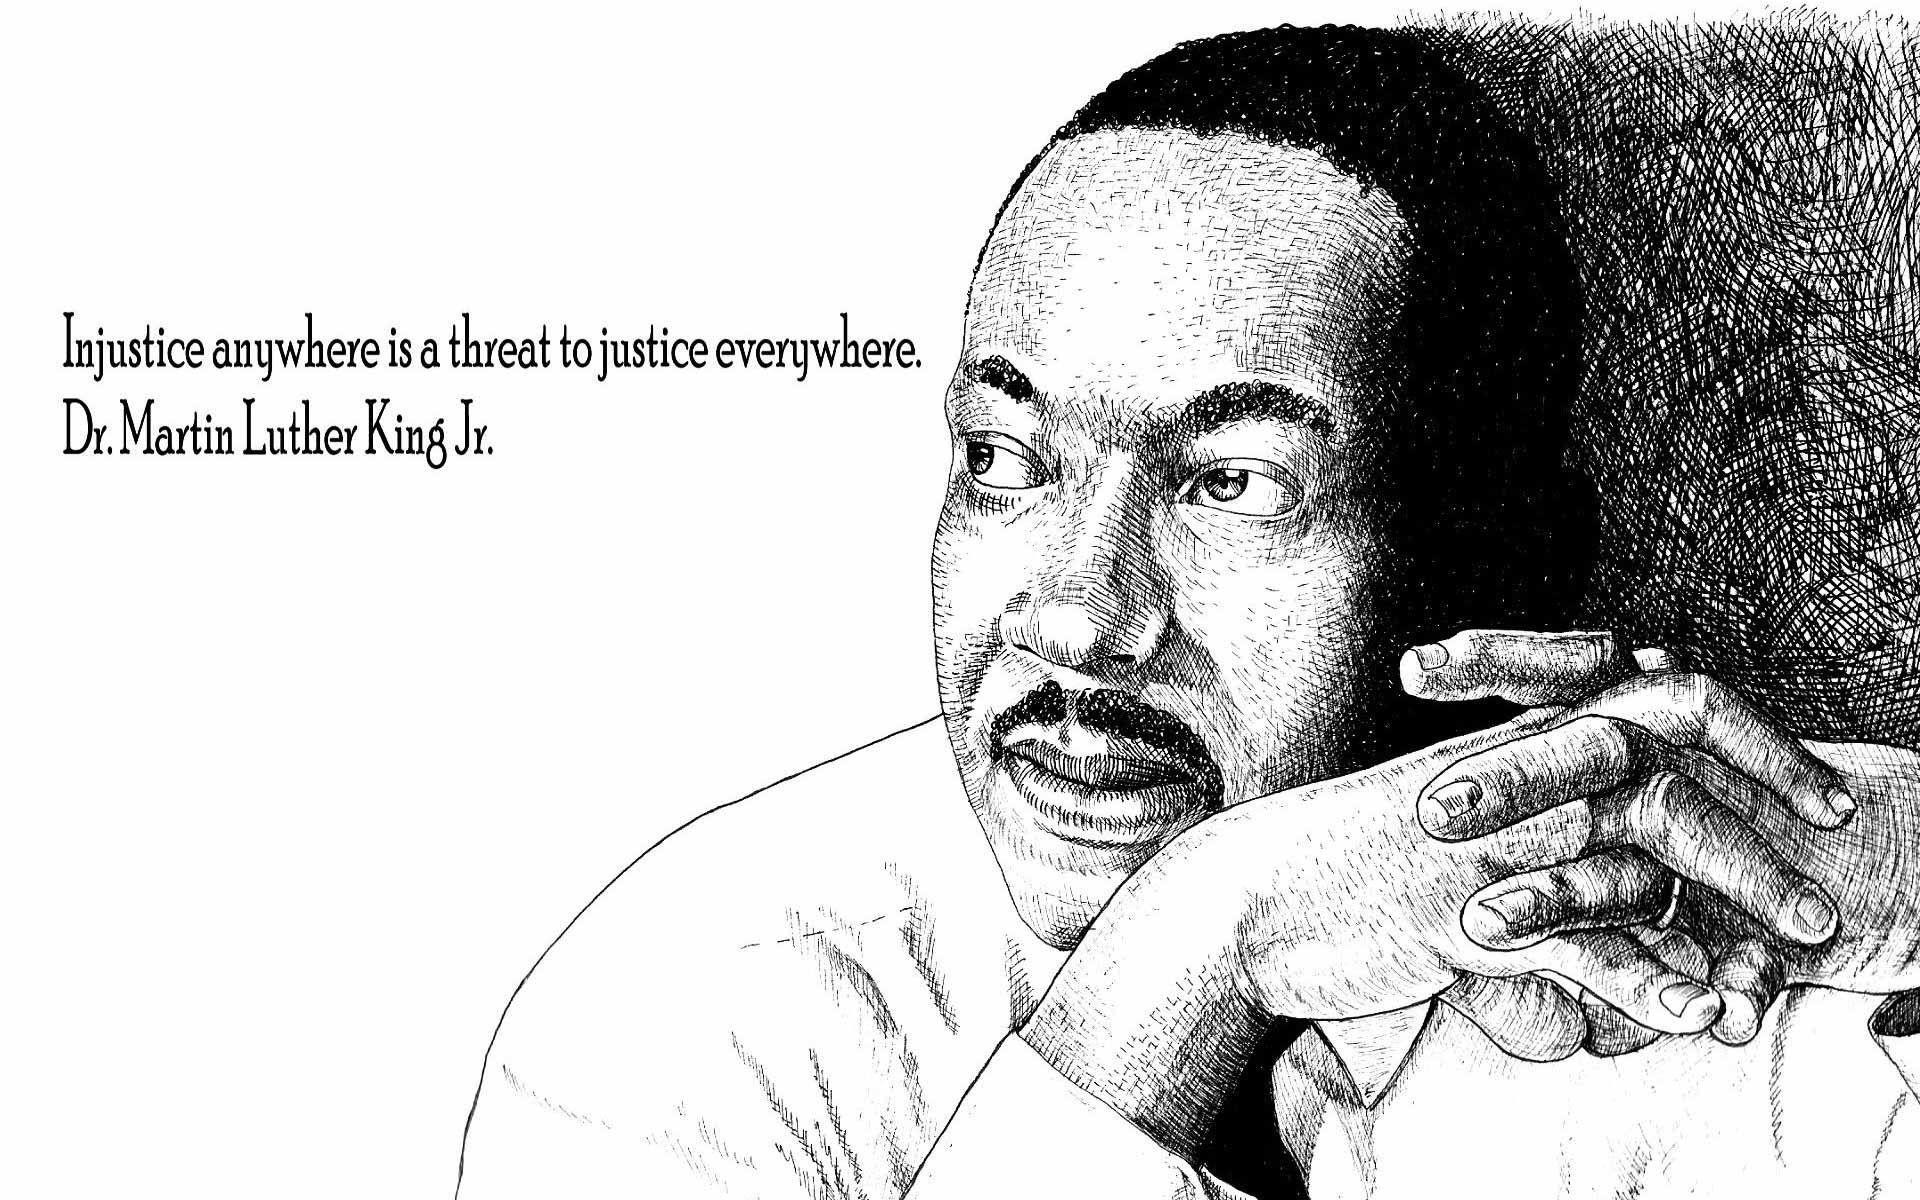 Wallpaper, 1920x1200 px, African, american, civil, jr, king, luther, martin, negro, political, poster, rights 1920x1200